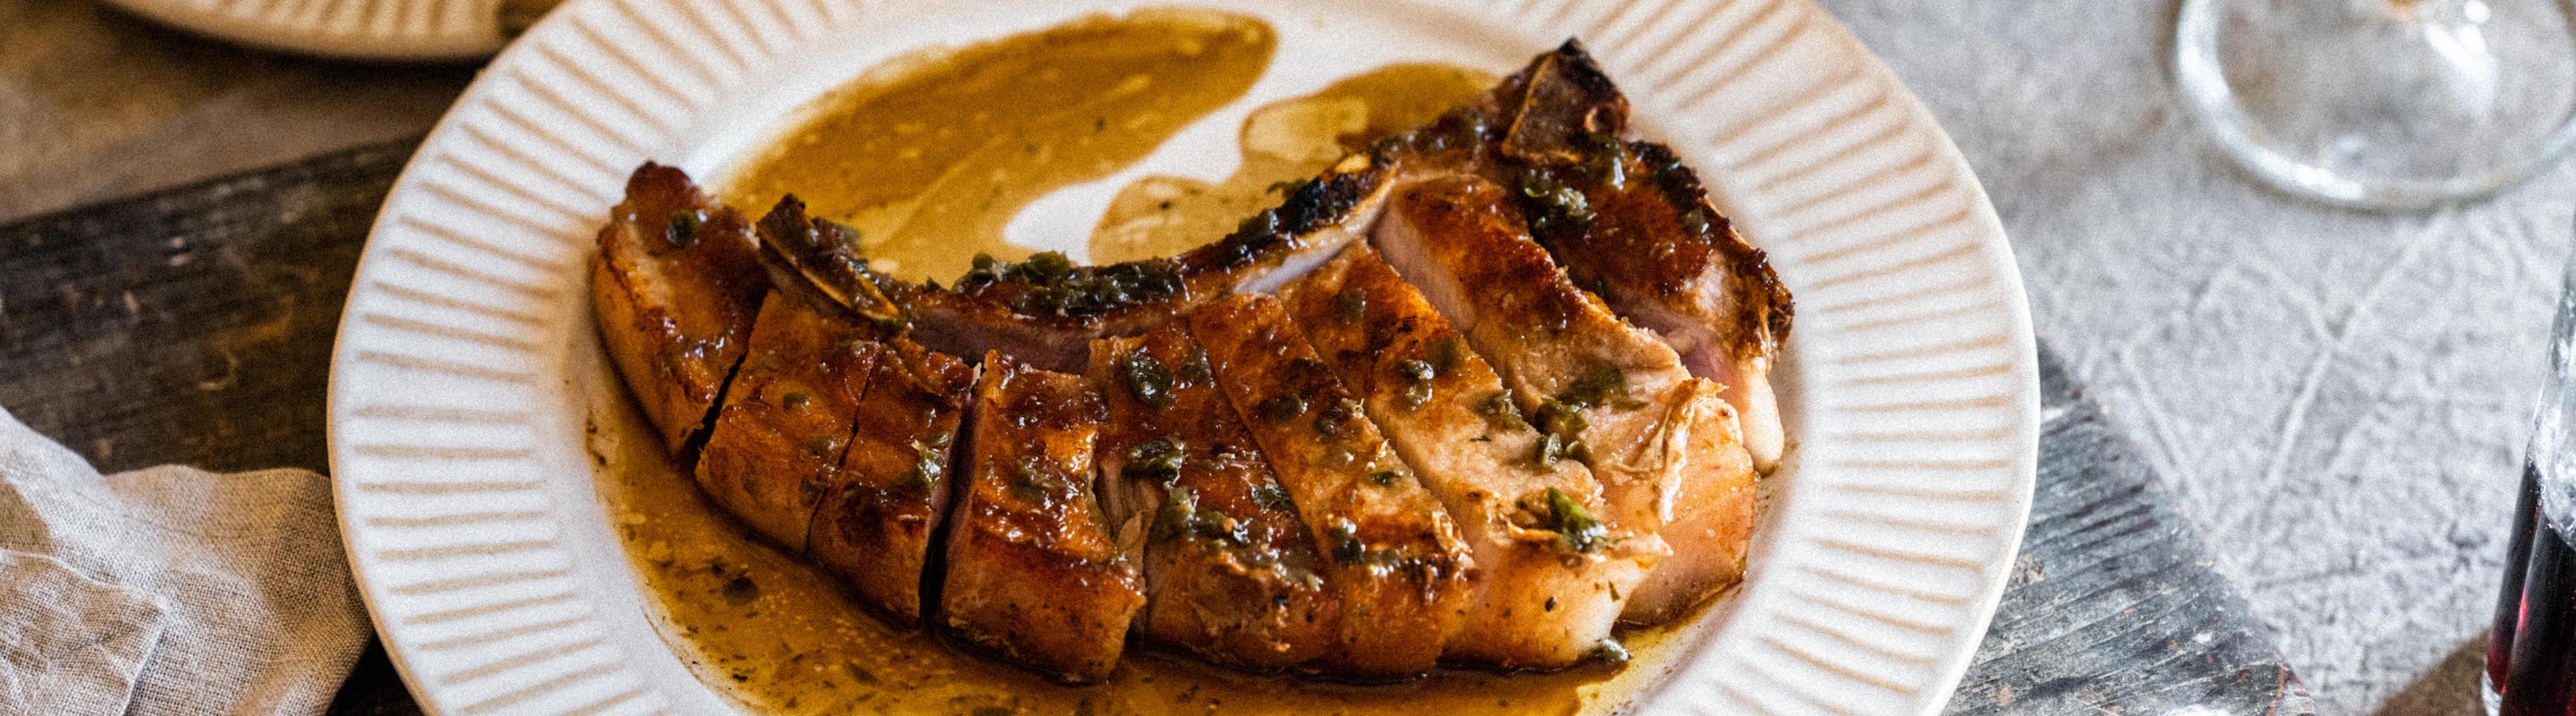 Pork chops with fried hispi cabbage and cider sauce 